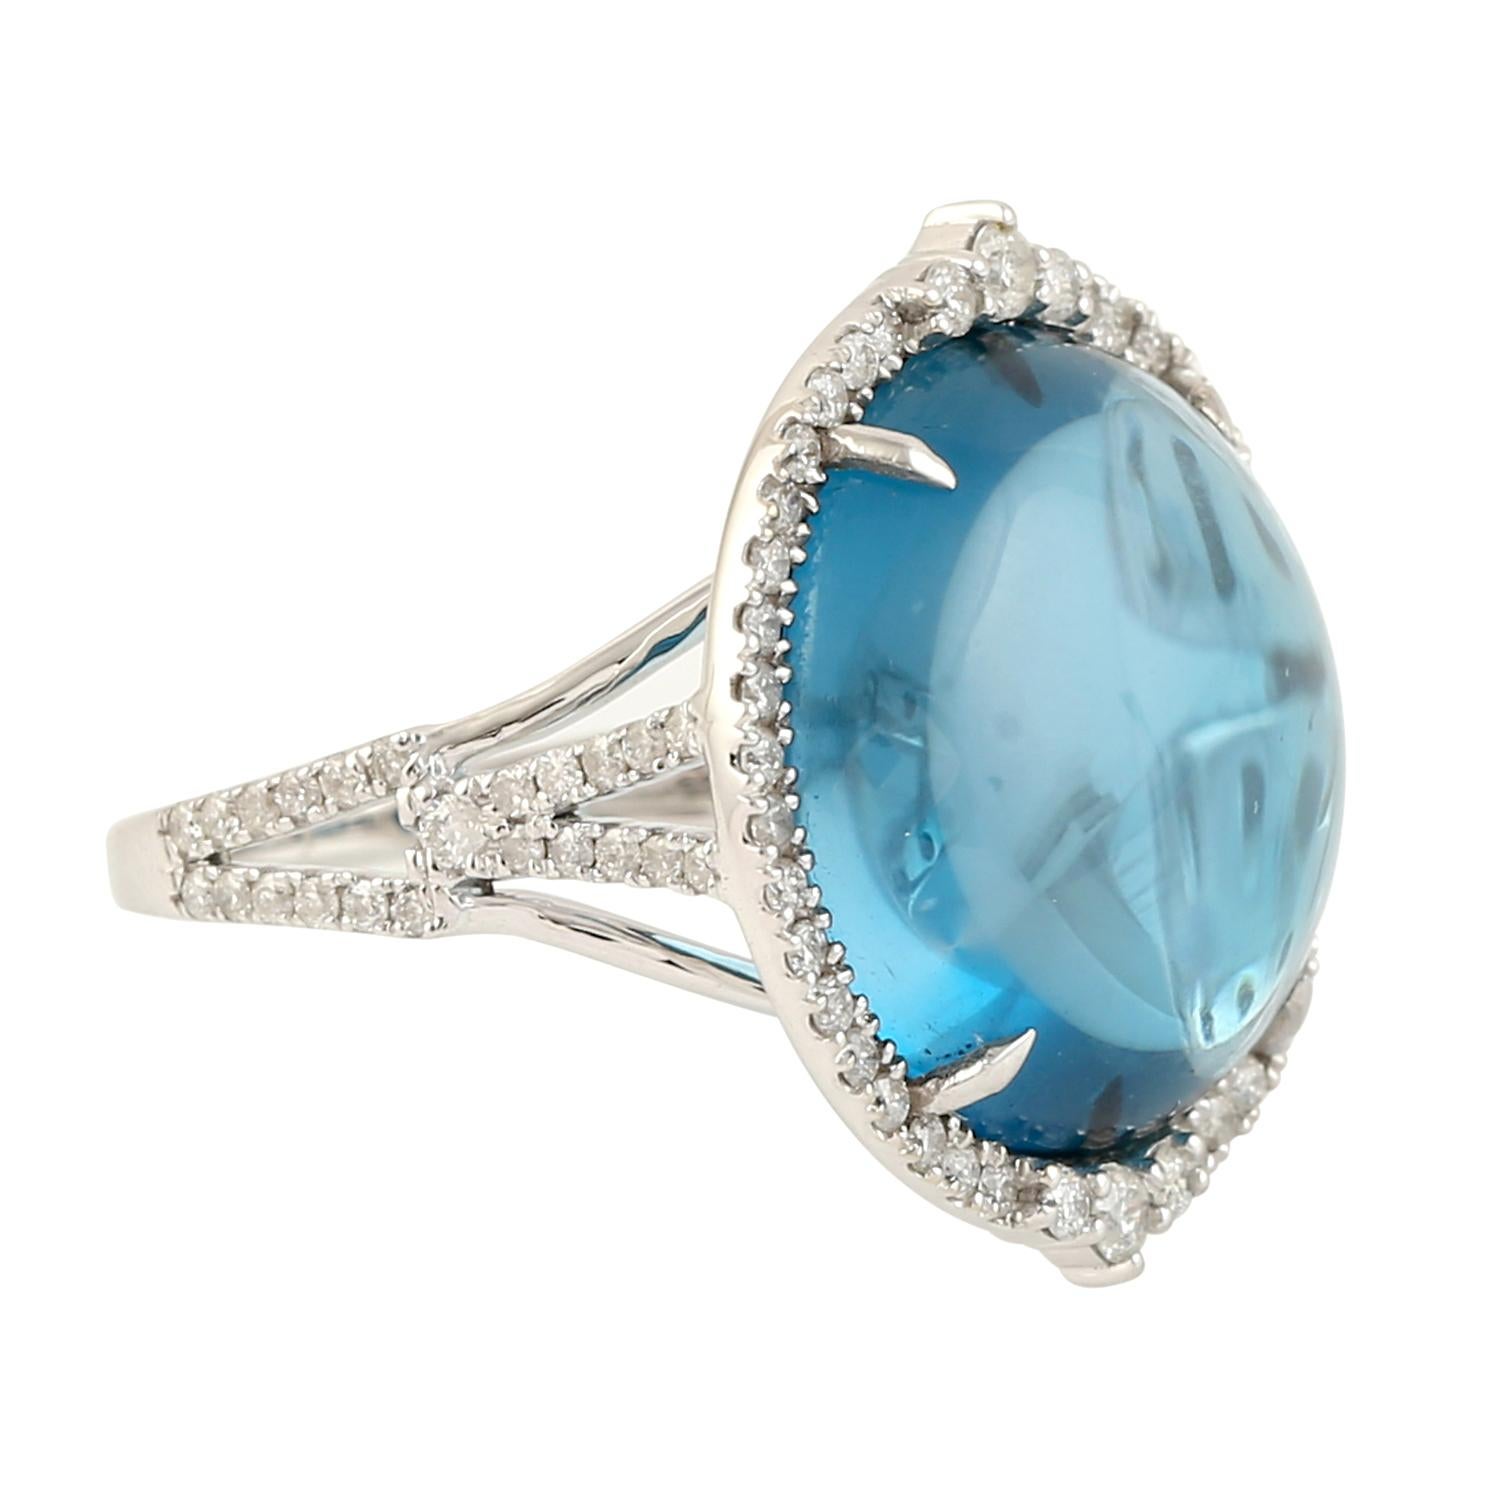 Mixed Cut 15.14 ct Oval Shaped Blue Topaz Cocktail Ring w/ Diamonds Made In 18k White Gold For Sale